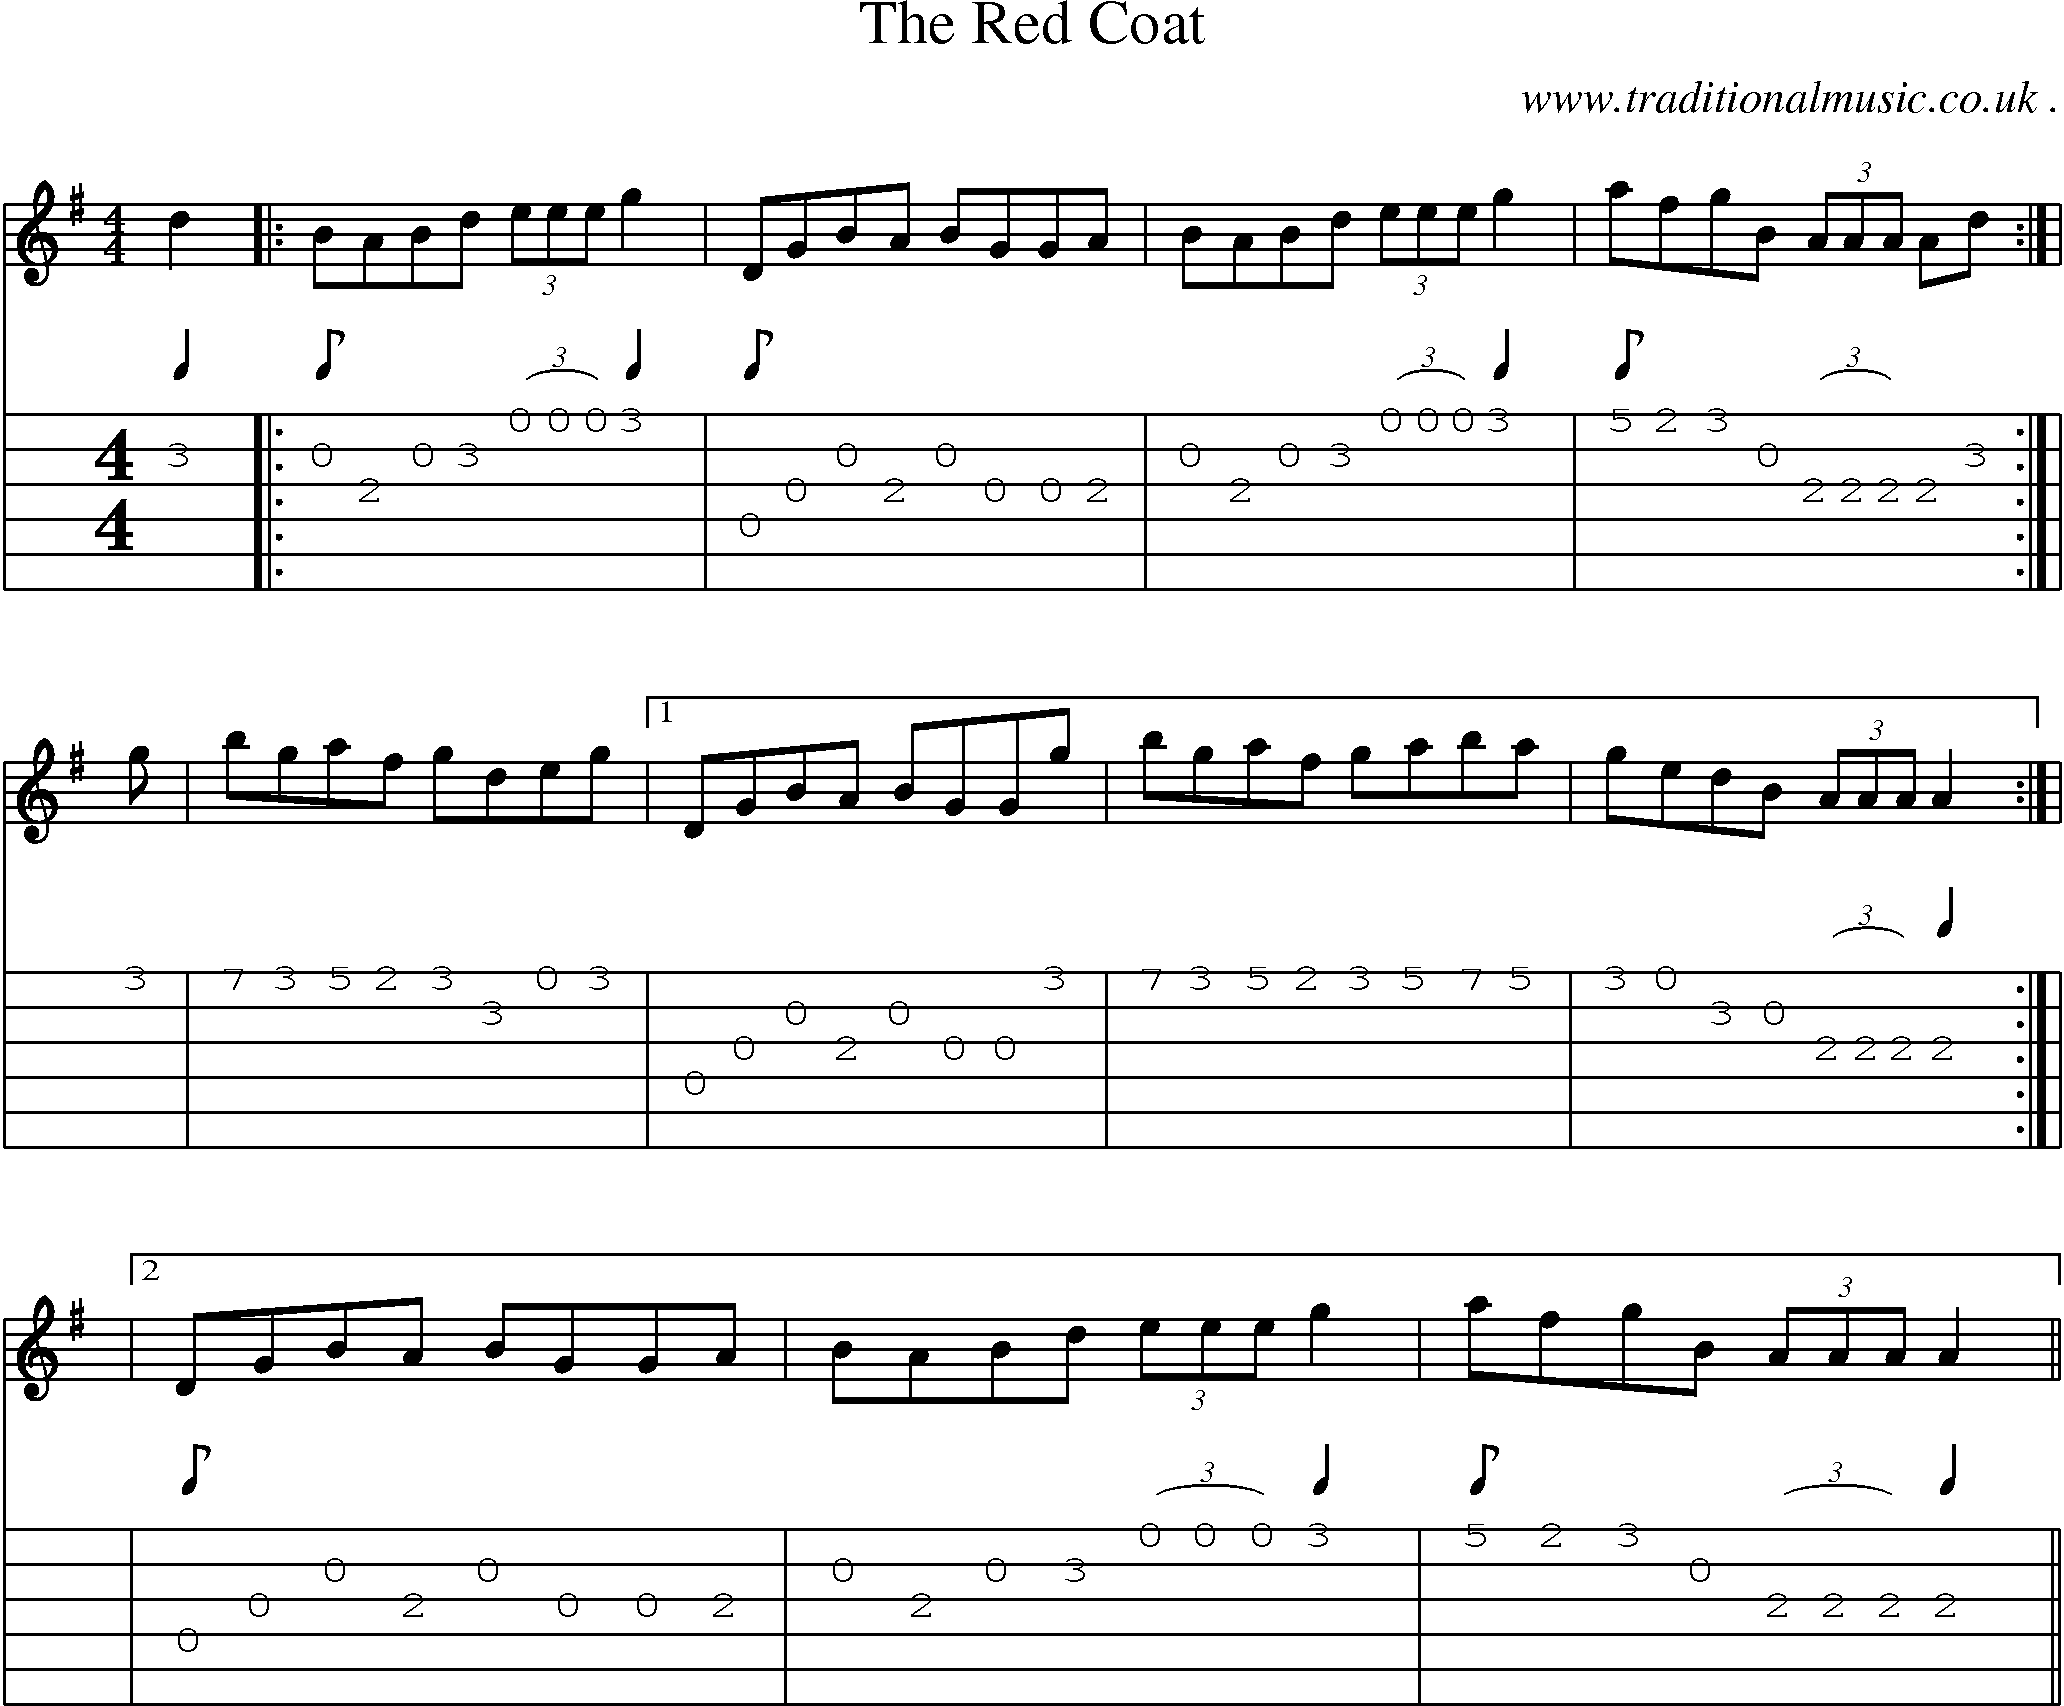 Sheet-Music and Guitar Tabs for The Red Coat